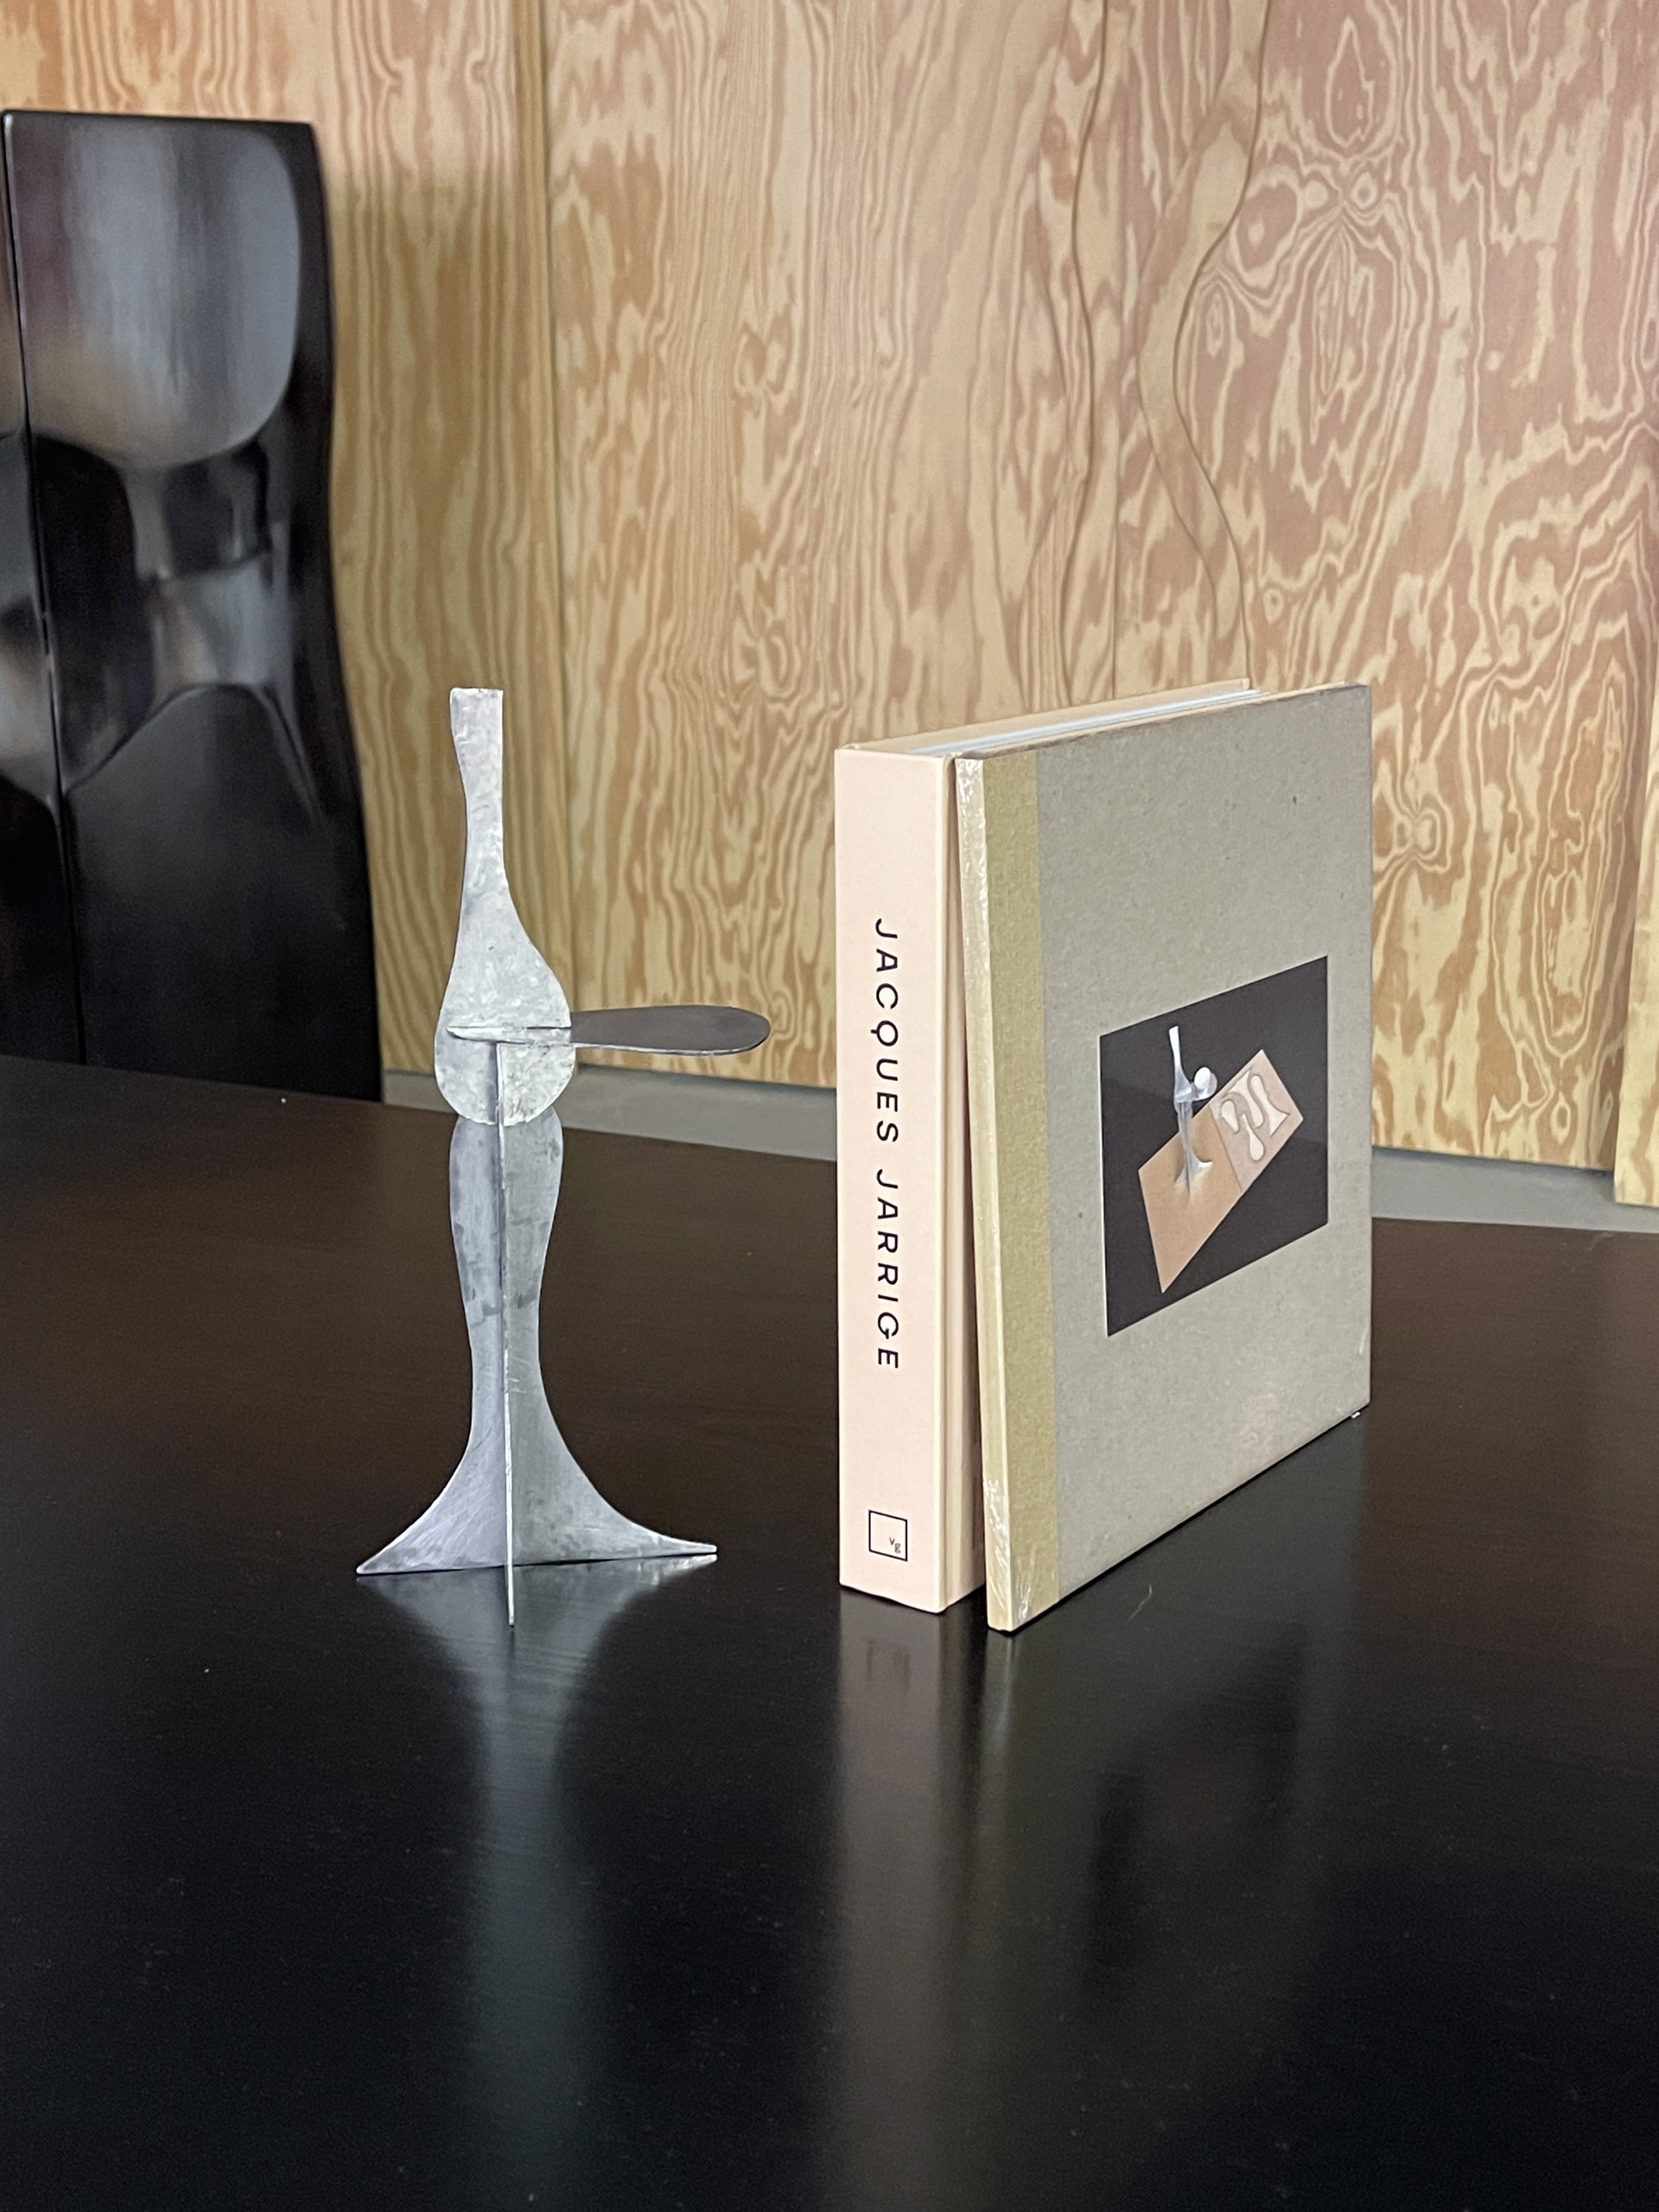 Collector's  limited edition book Jacques Jarrige with Candleholder by Jacques Jarrige